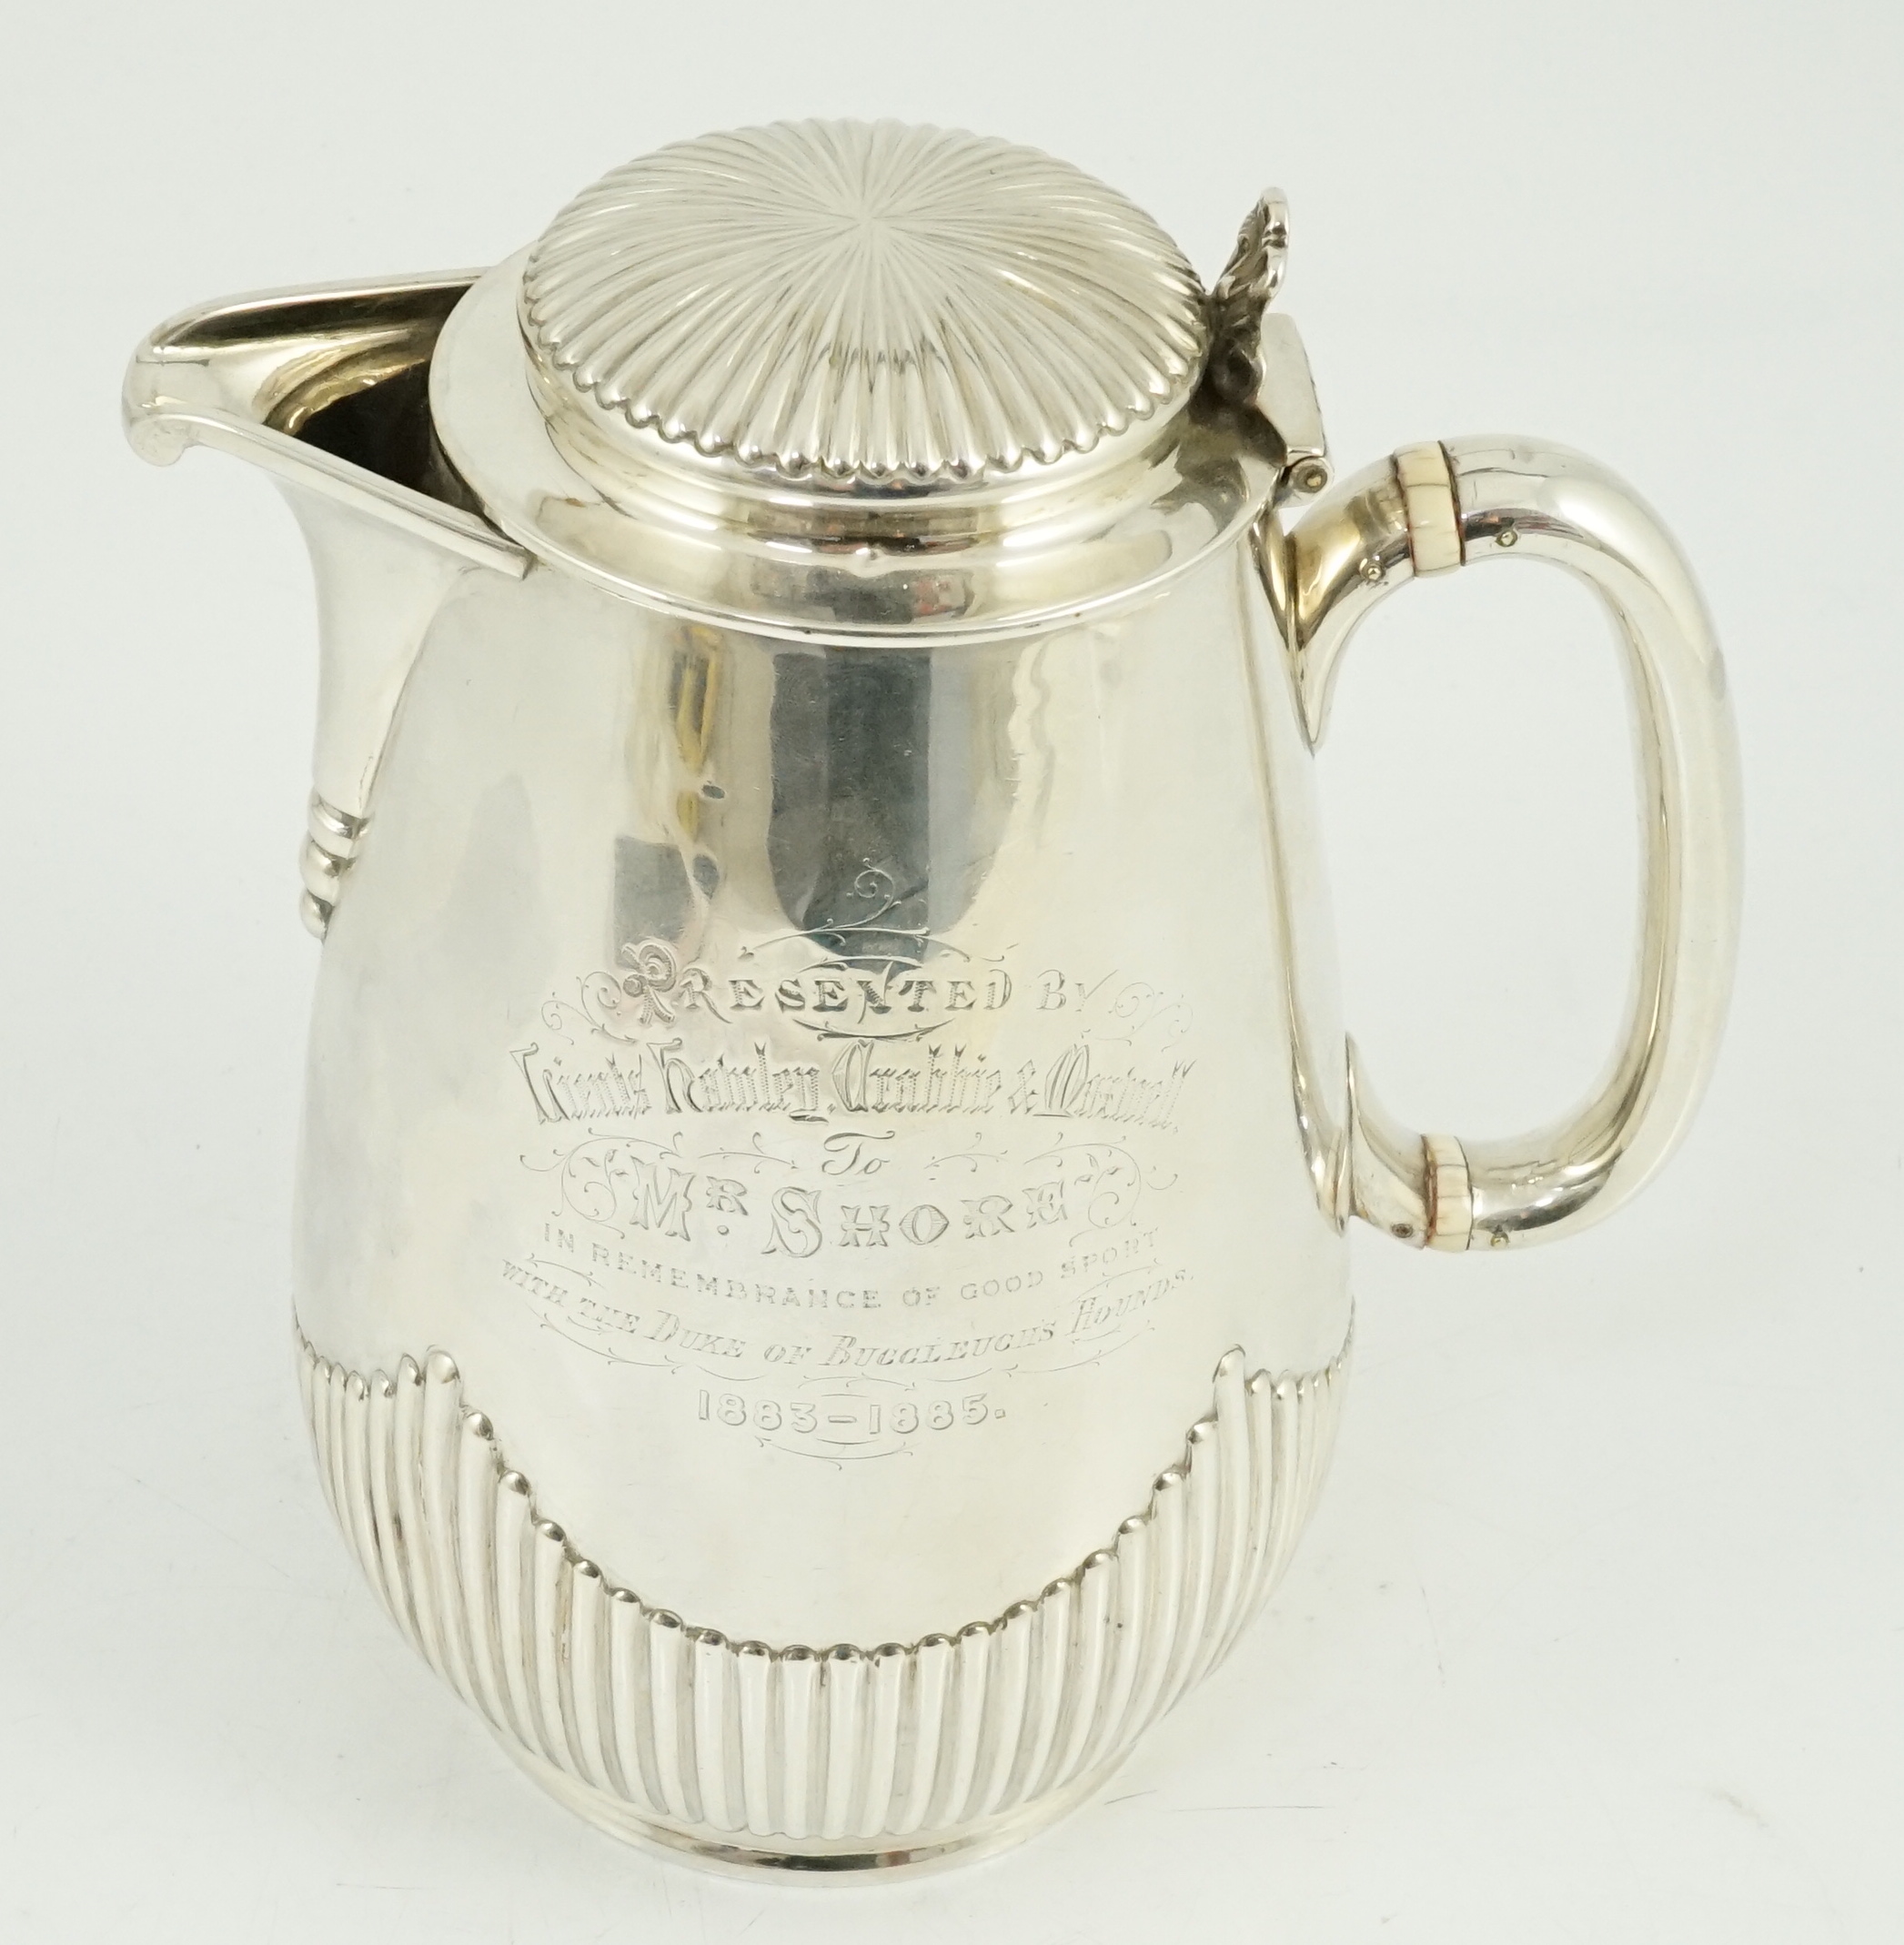 The Royal Scots Greys. A Victorian Scottish silver hotwater pot, Hamilton & Inches, Edinburgh, 1882, - Image 7 of 8